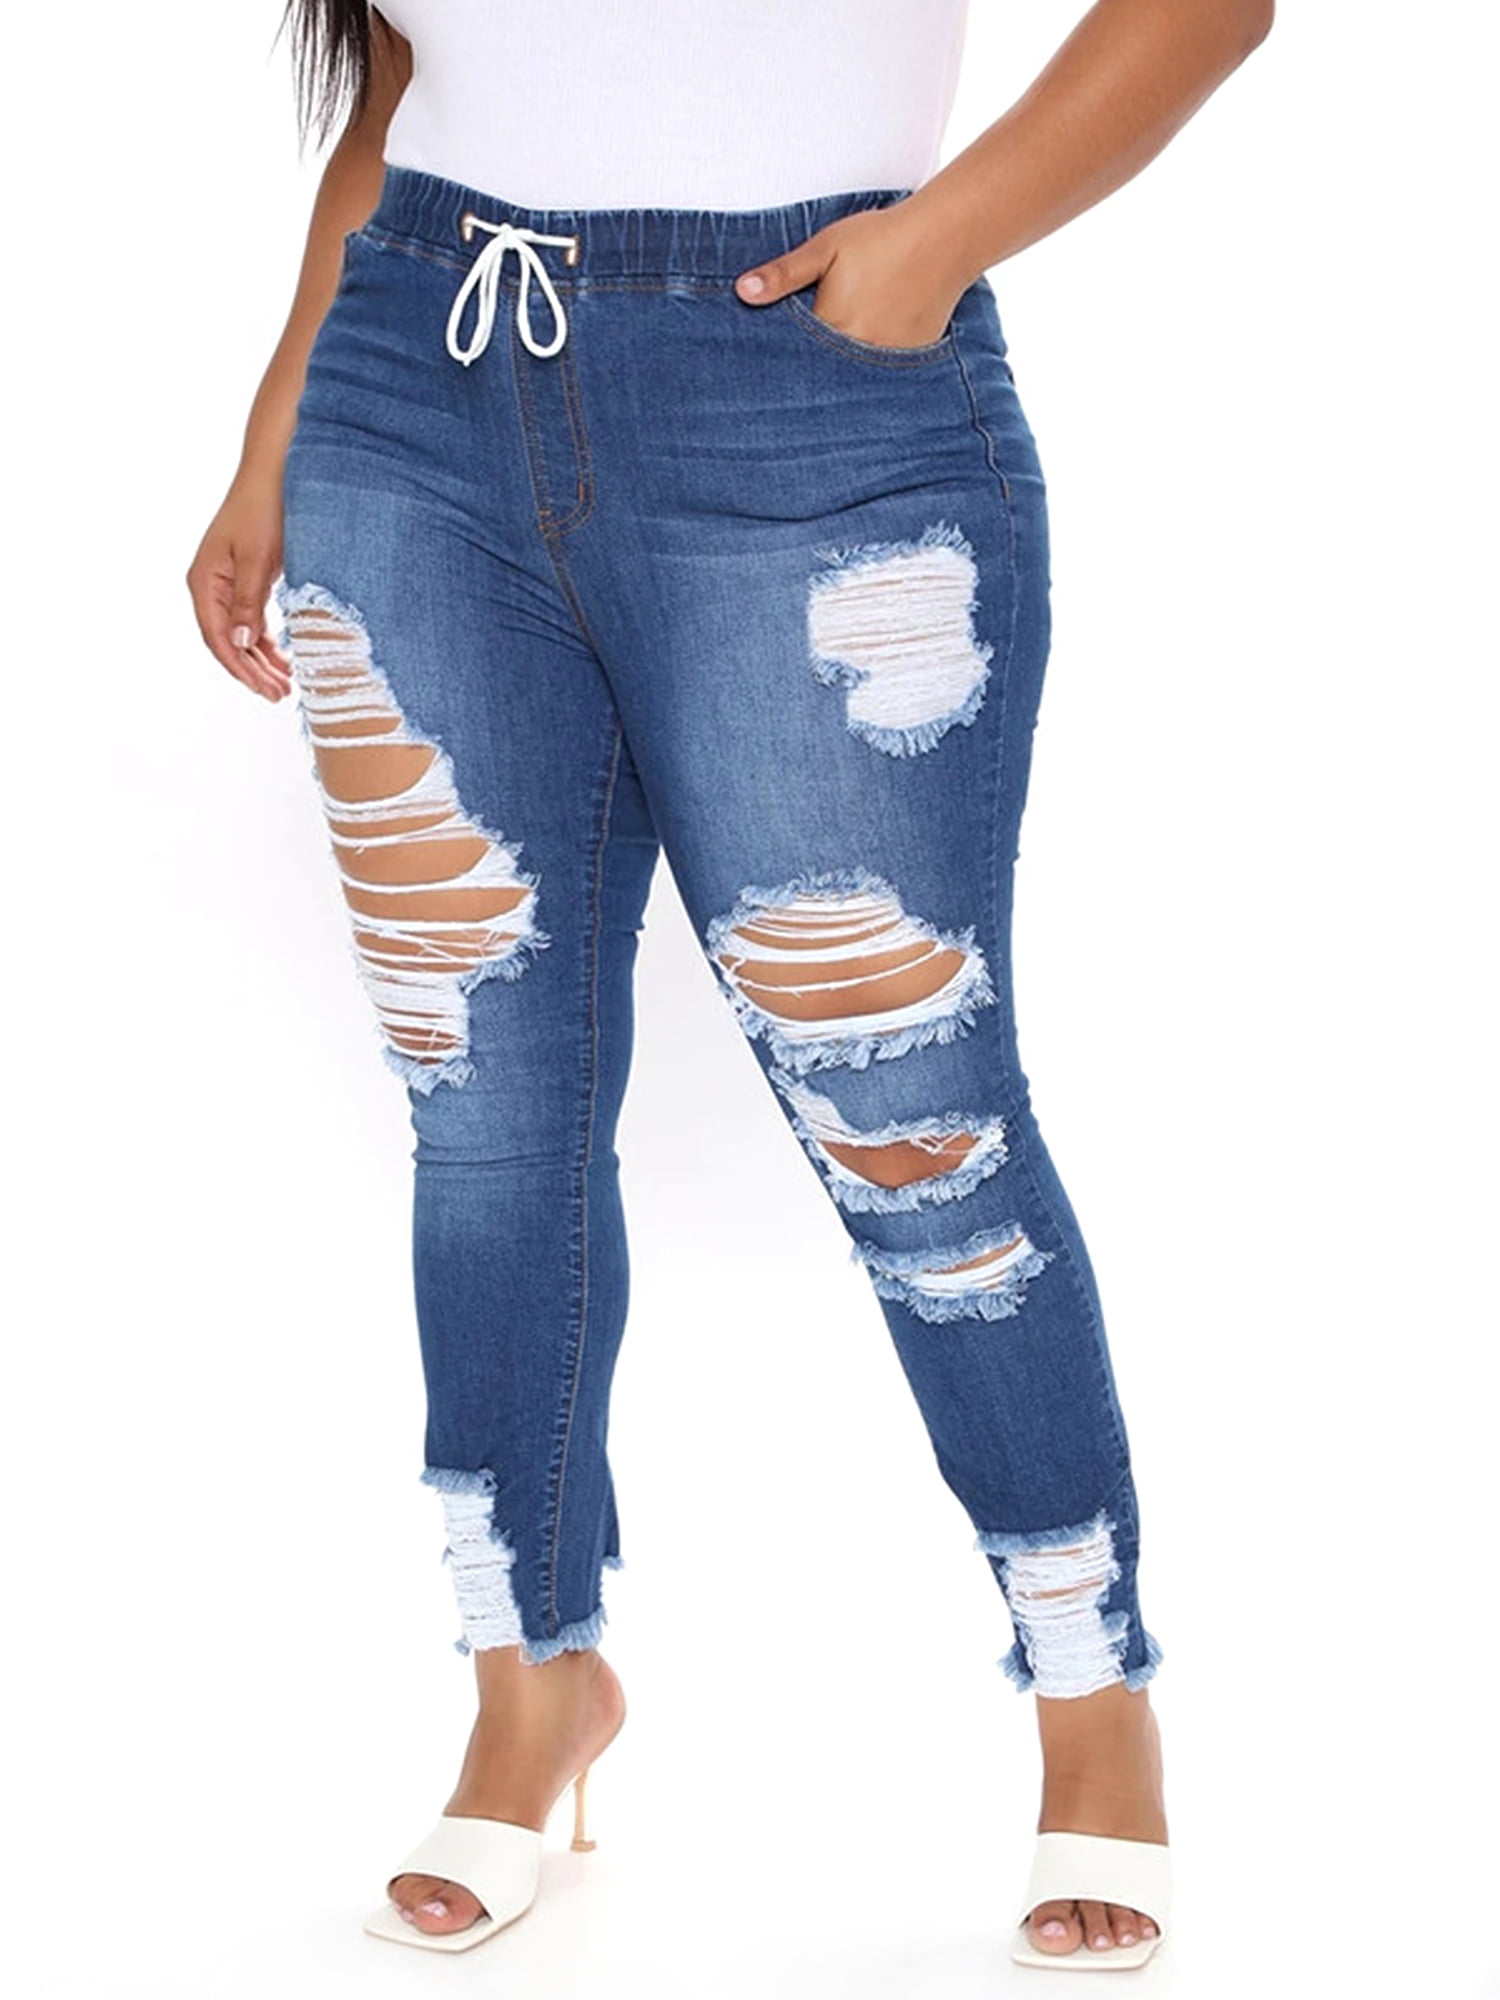 Jeans for Women Plus Size,Juniors Stretch Distressed Boyfriend Relaxed Fit Straight Leg Skinny Denim Jeans